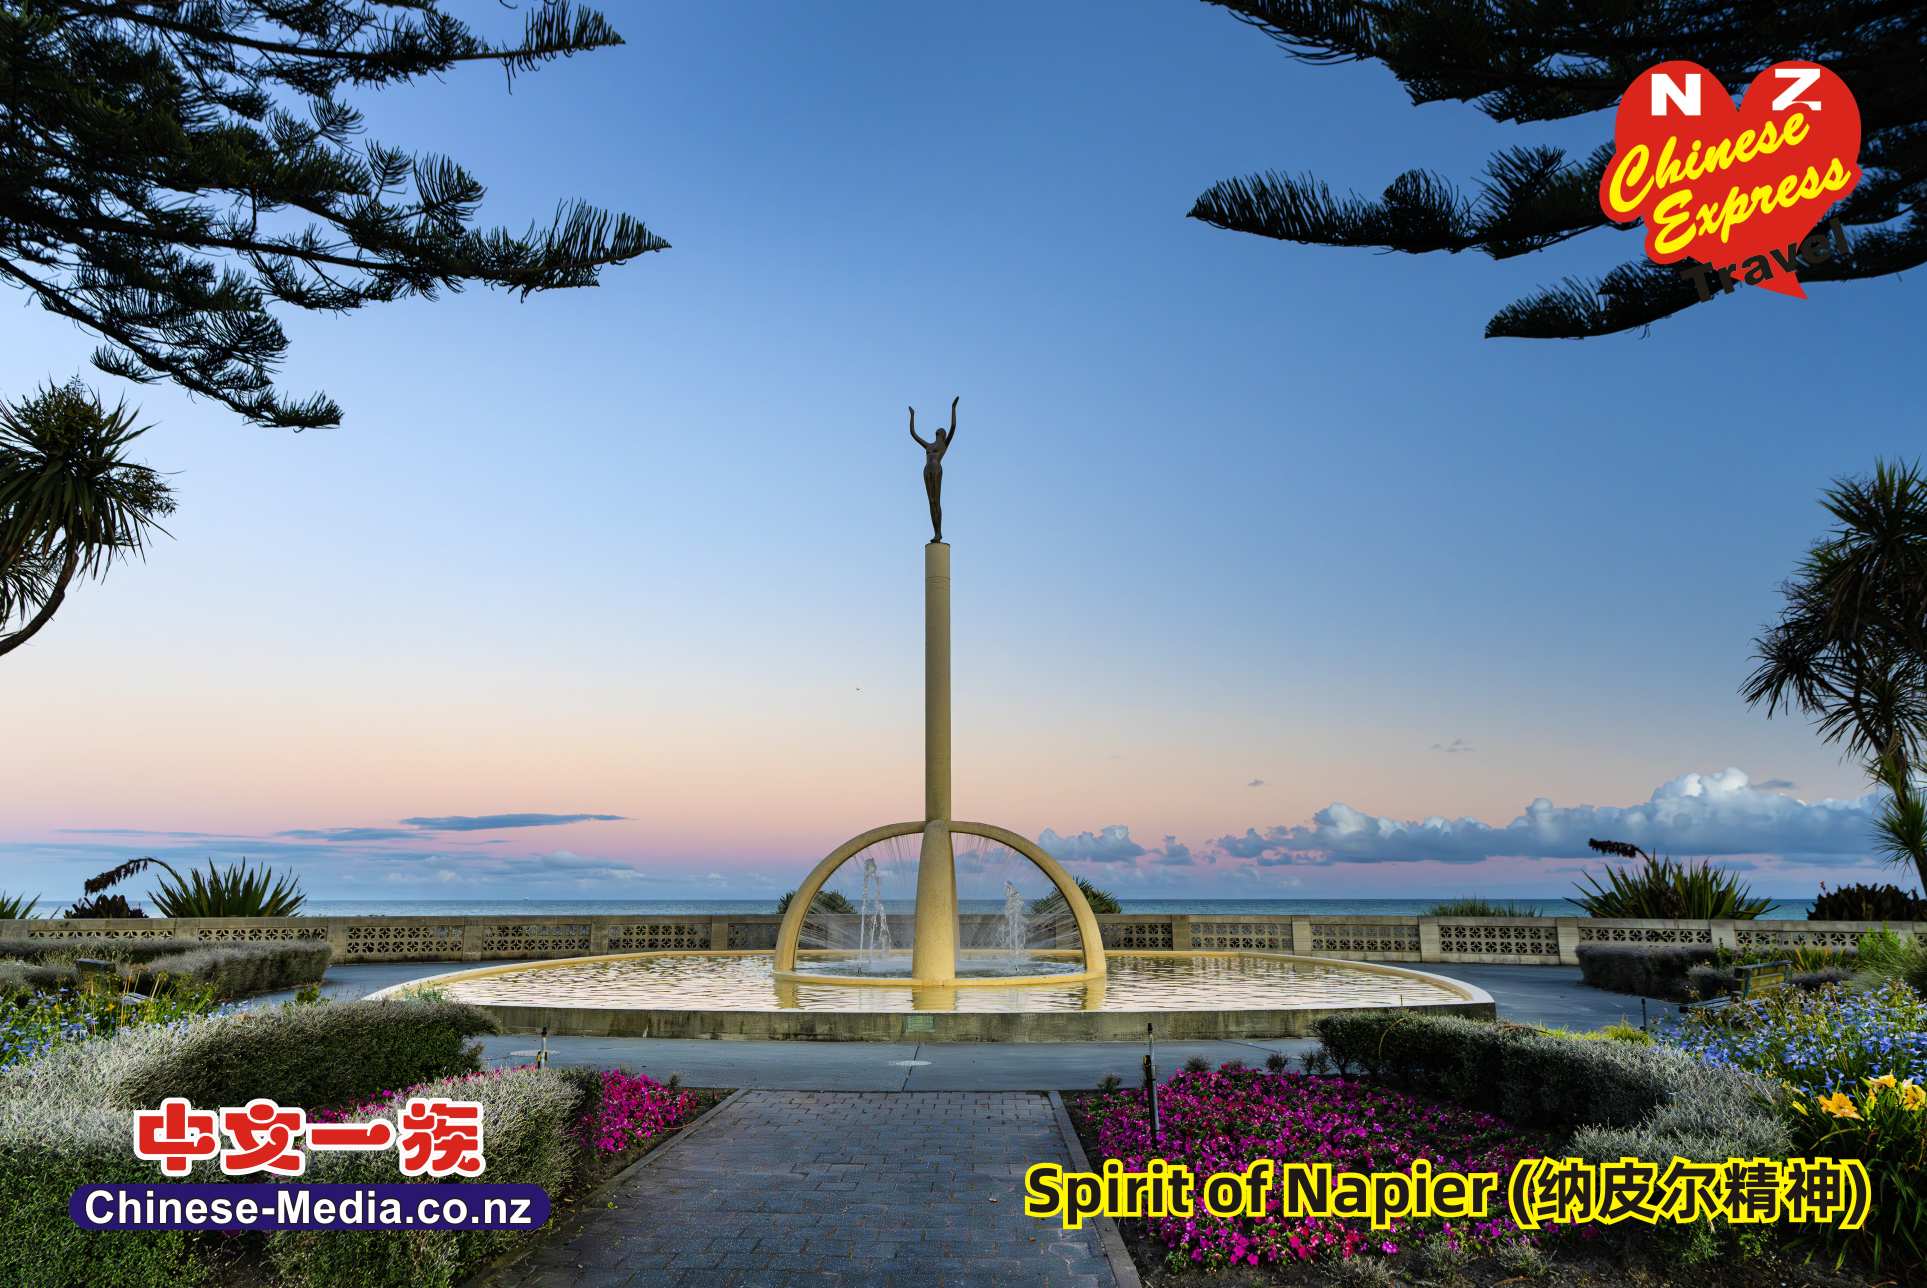 Bluff Hill Lookout Napier 納皮爾 Port of Napier Napier Arch Spirit of Napier    中文一族傳媒新西蘭旅遊景點